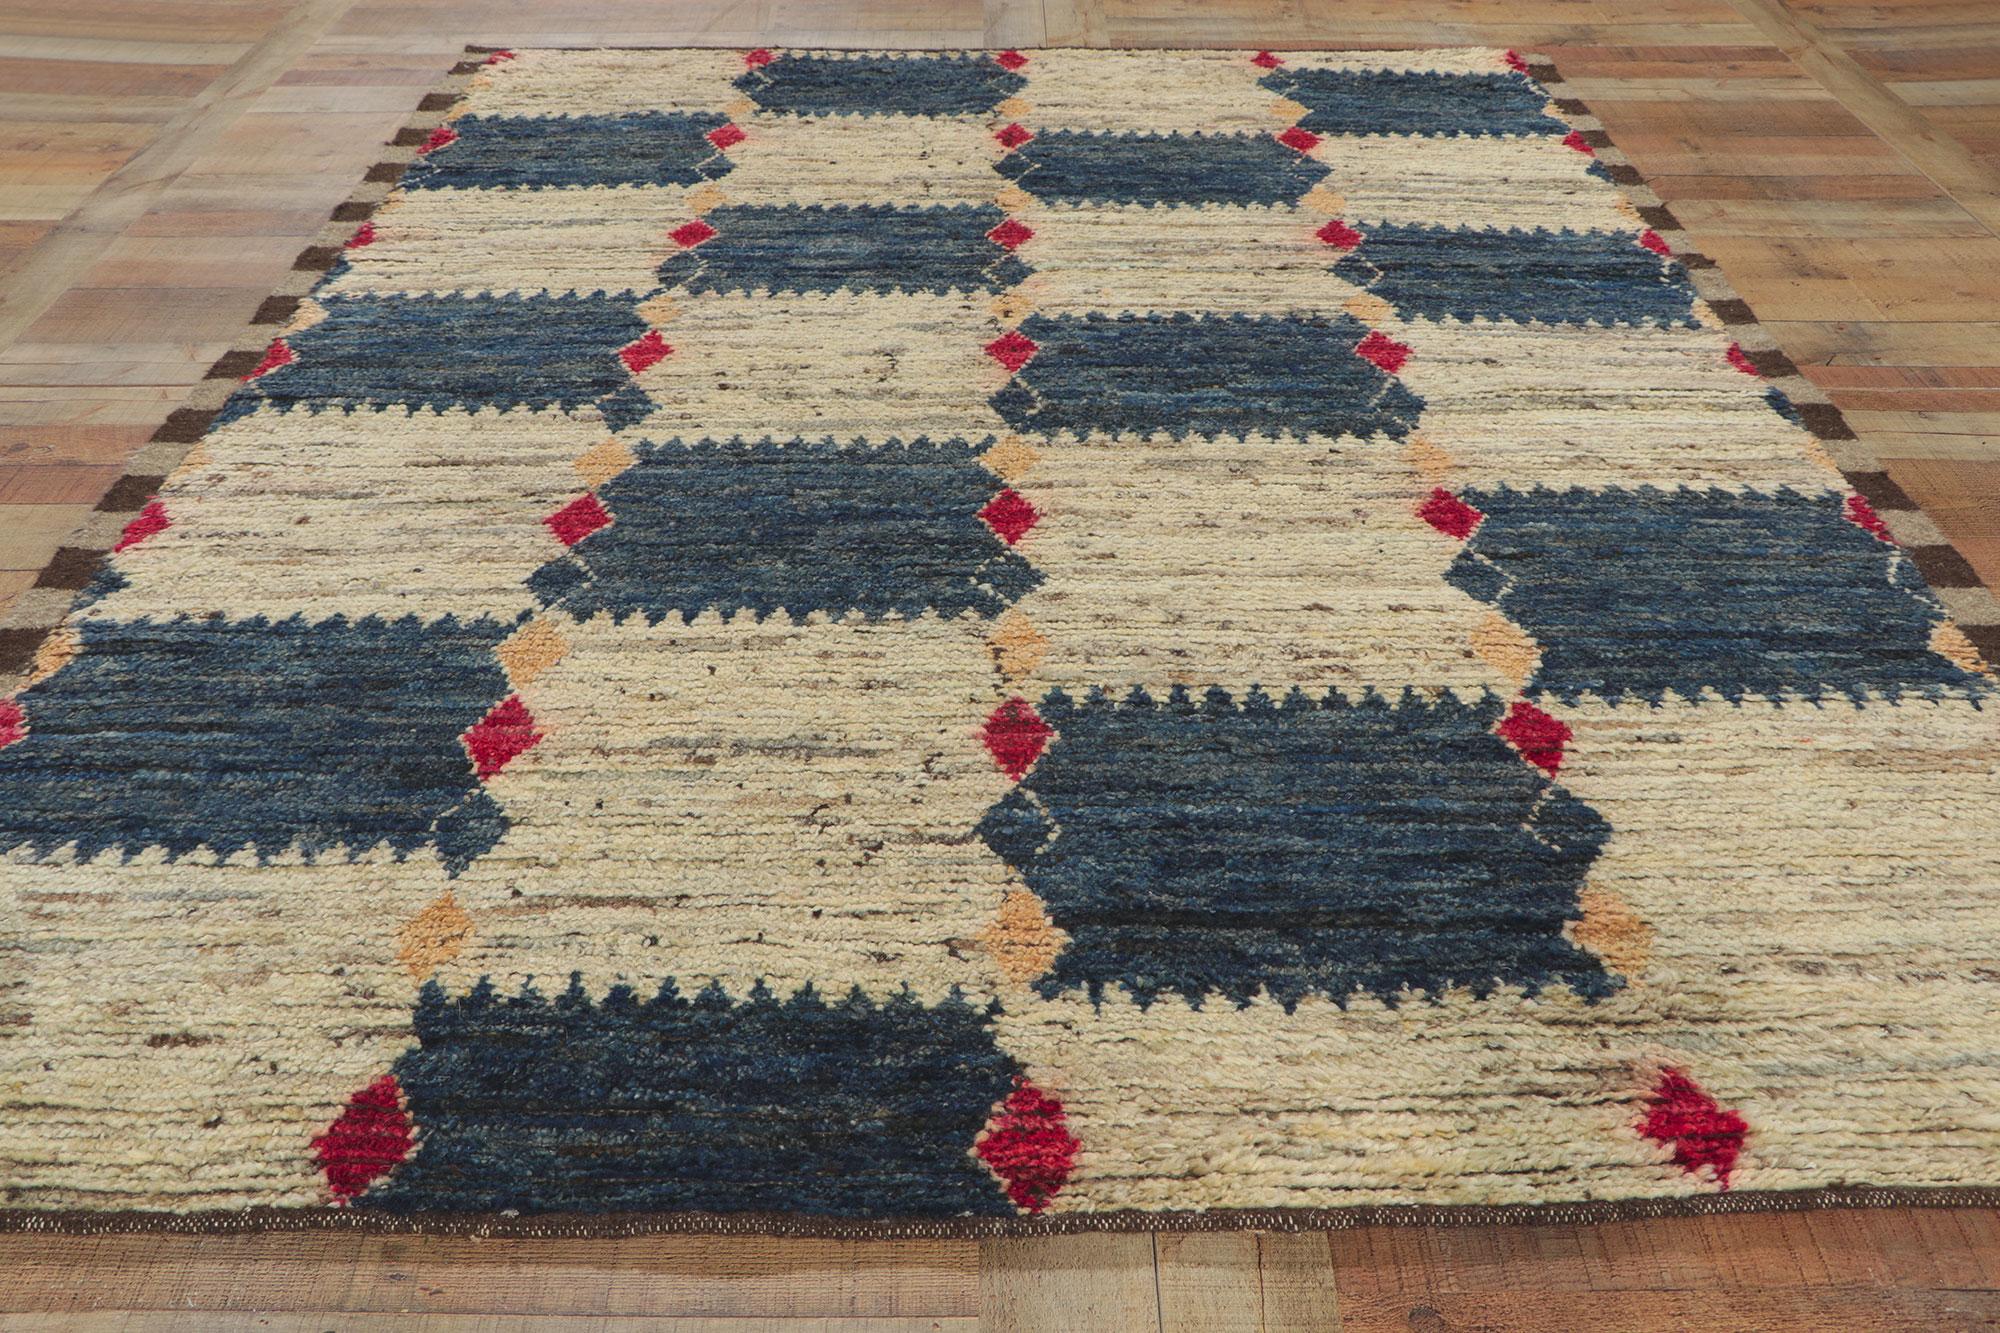 Wool Earth-tone Checkered Moroccan Rug, Midcentury Modern Meets Tribal Enchantment For Sale